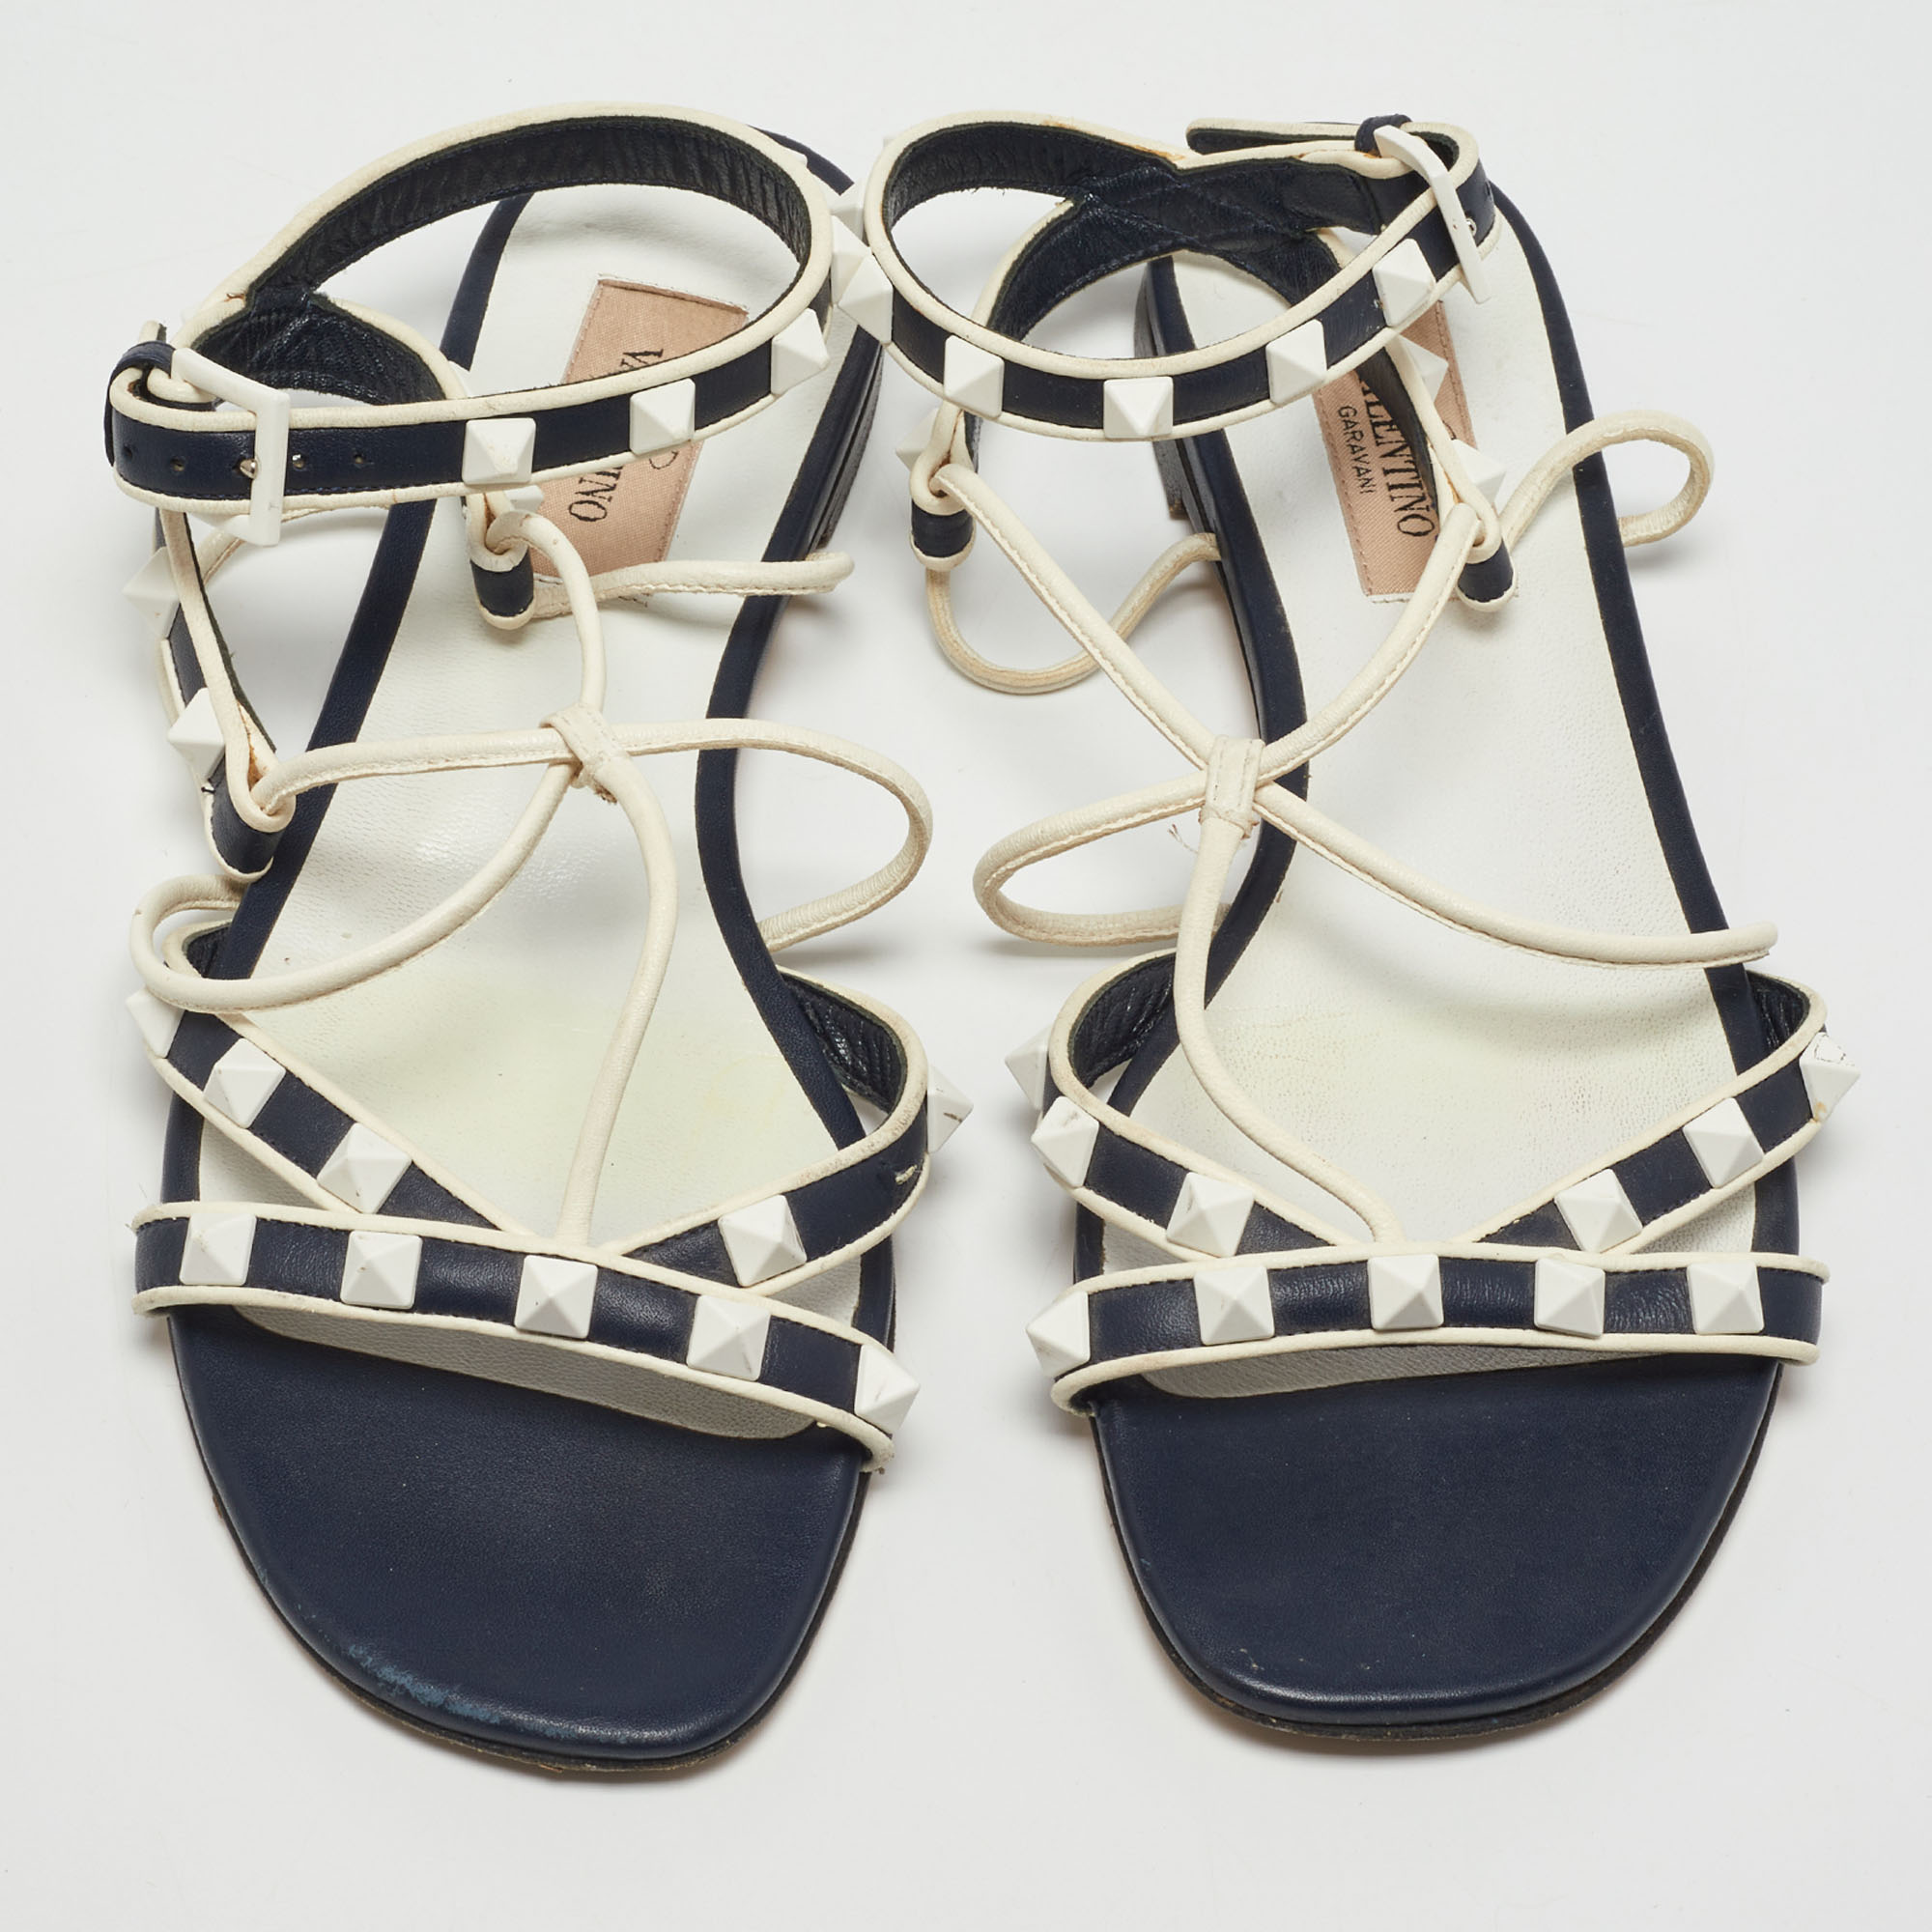 Valentino Navy Blue/White Leather Rockstud Ankle Strap Flat Sandals Size 36